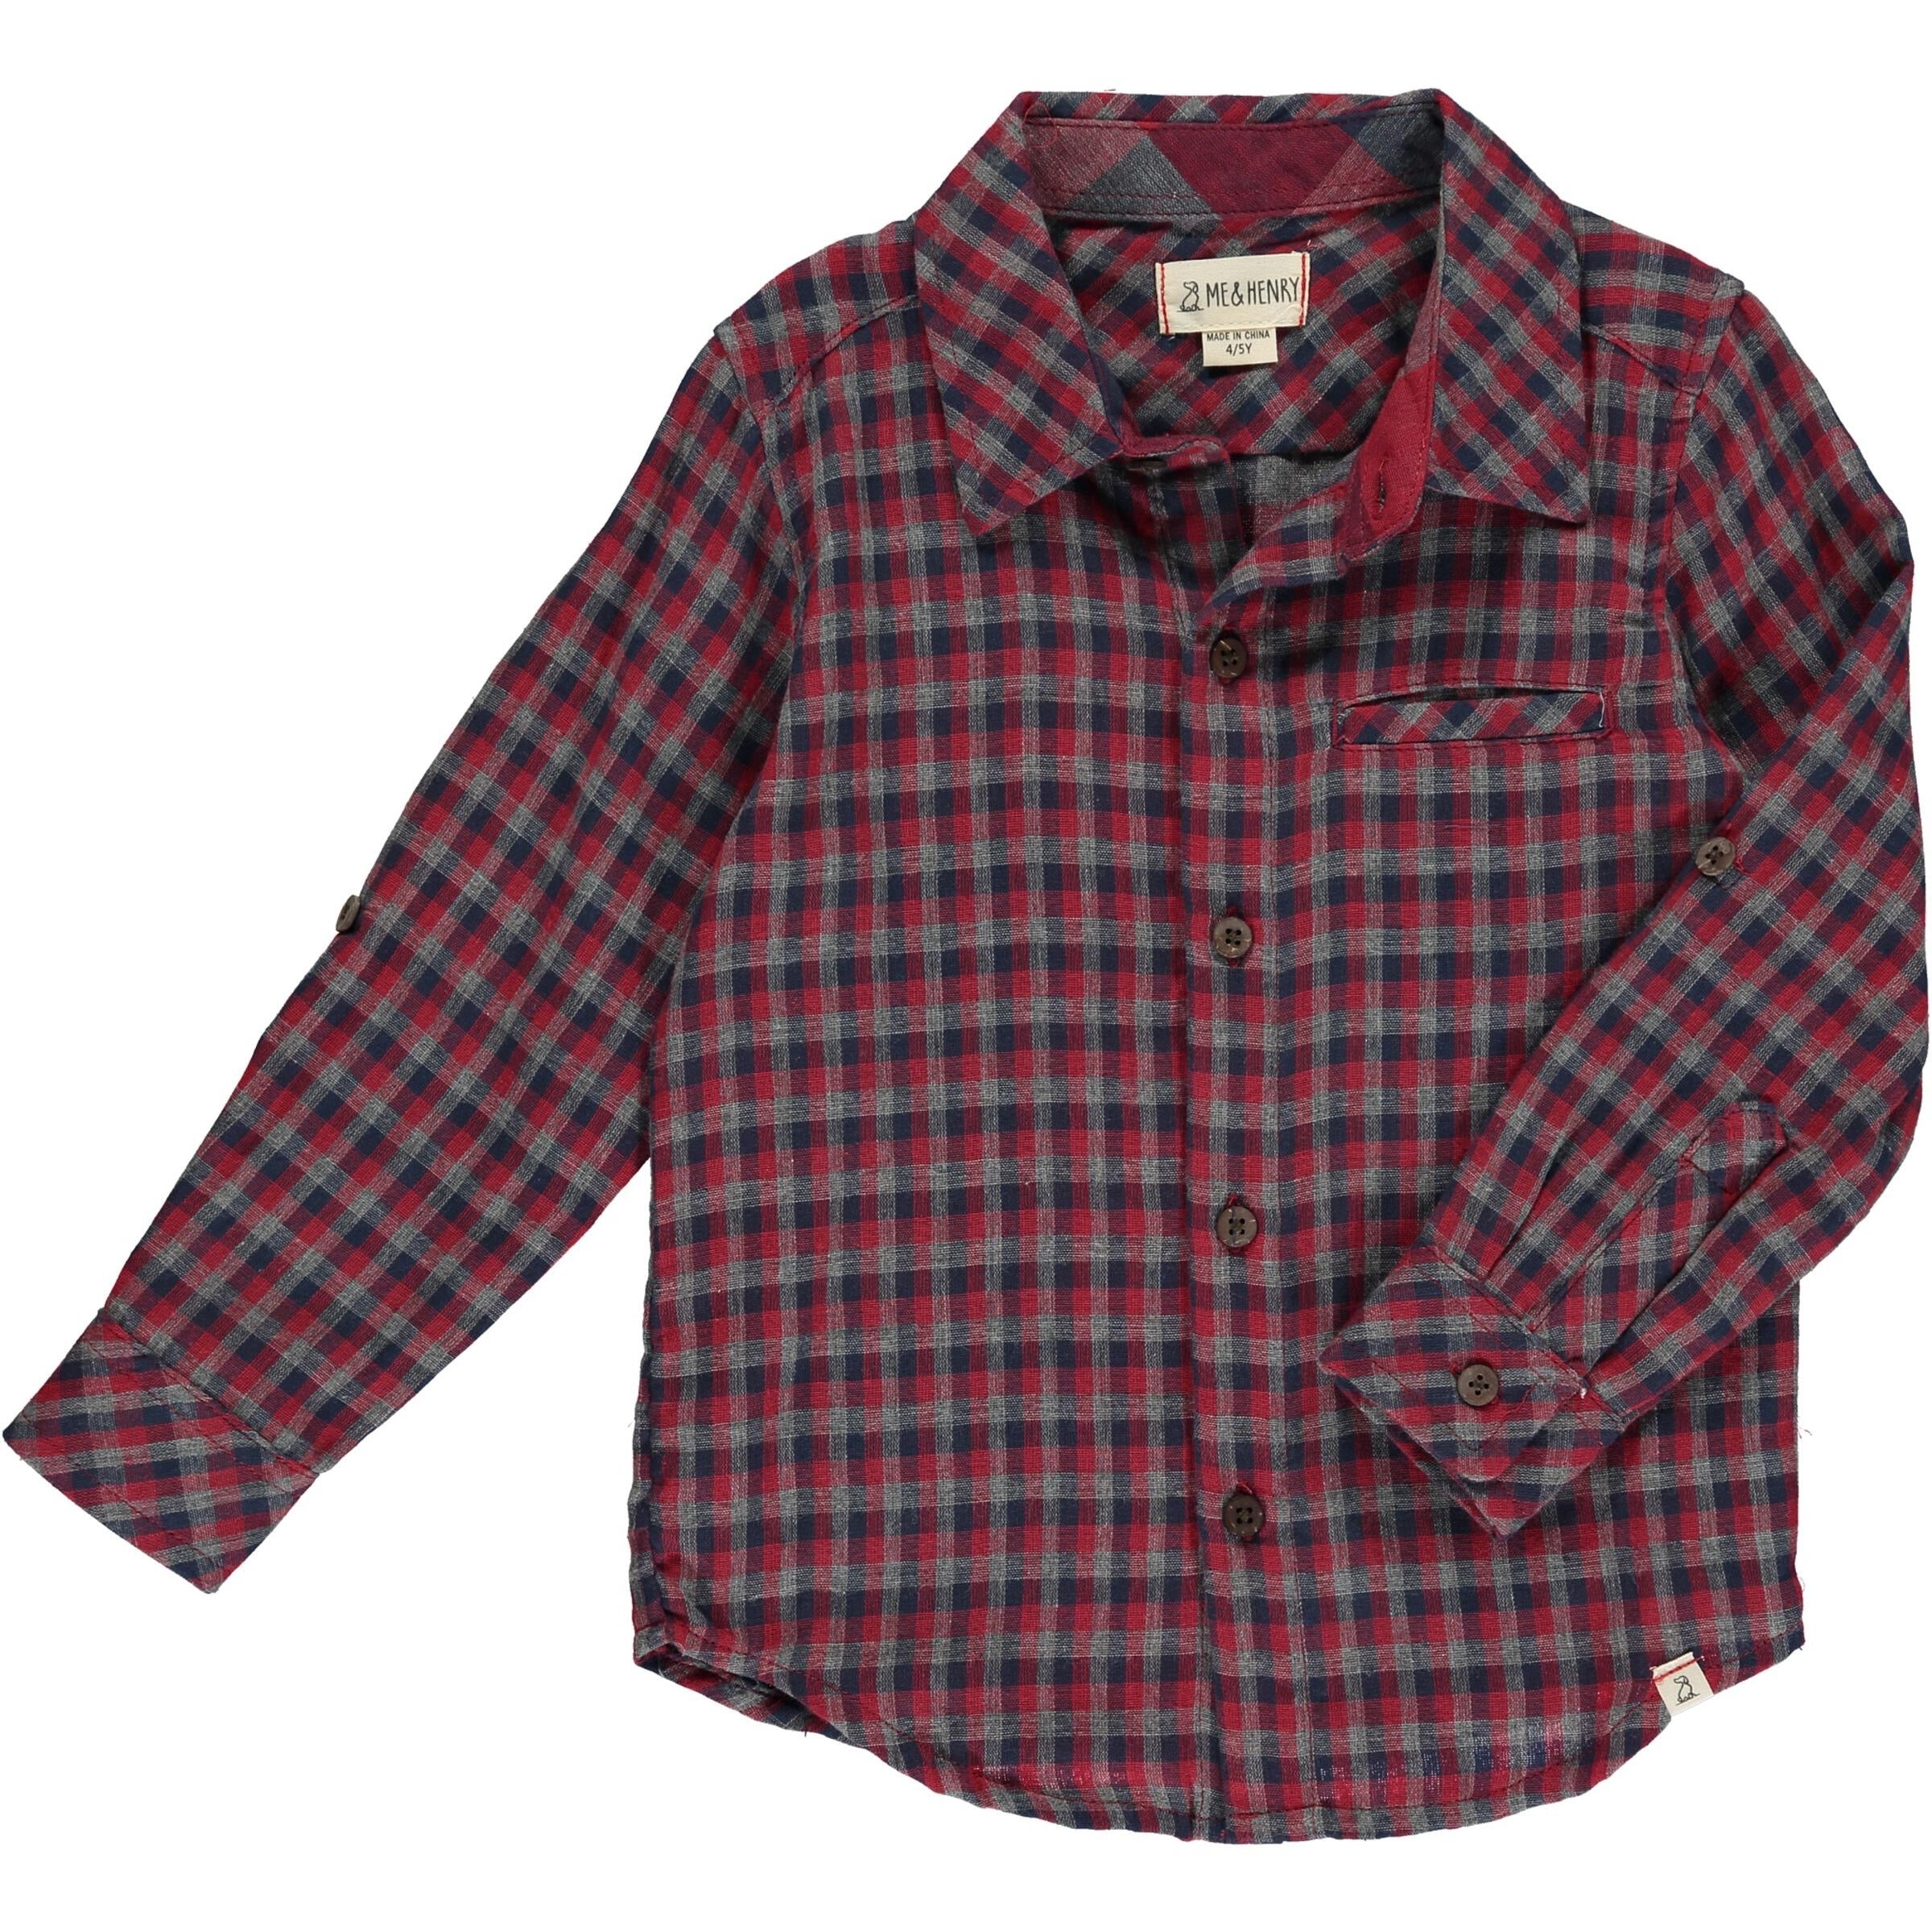 Me & Henry Red Multi Plaid Atwood Woven Shirt-ME & HENRY-Little Giant Kidz